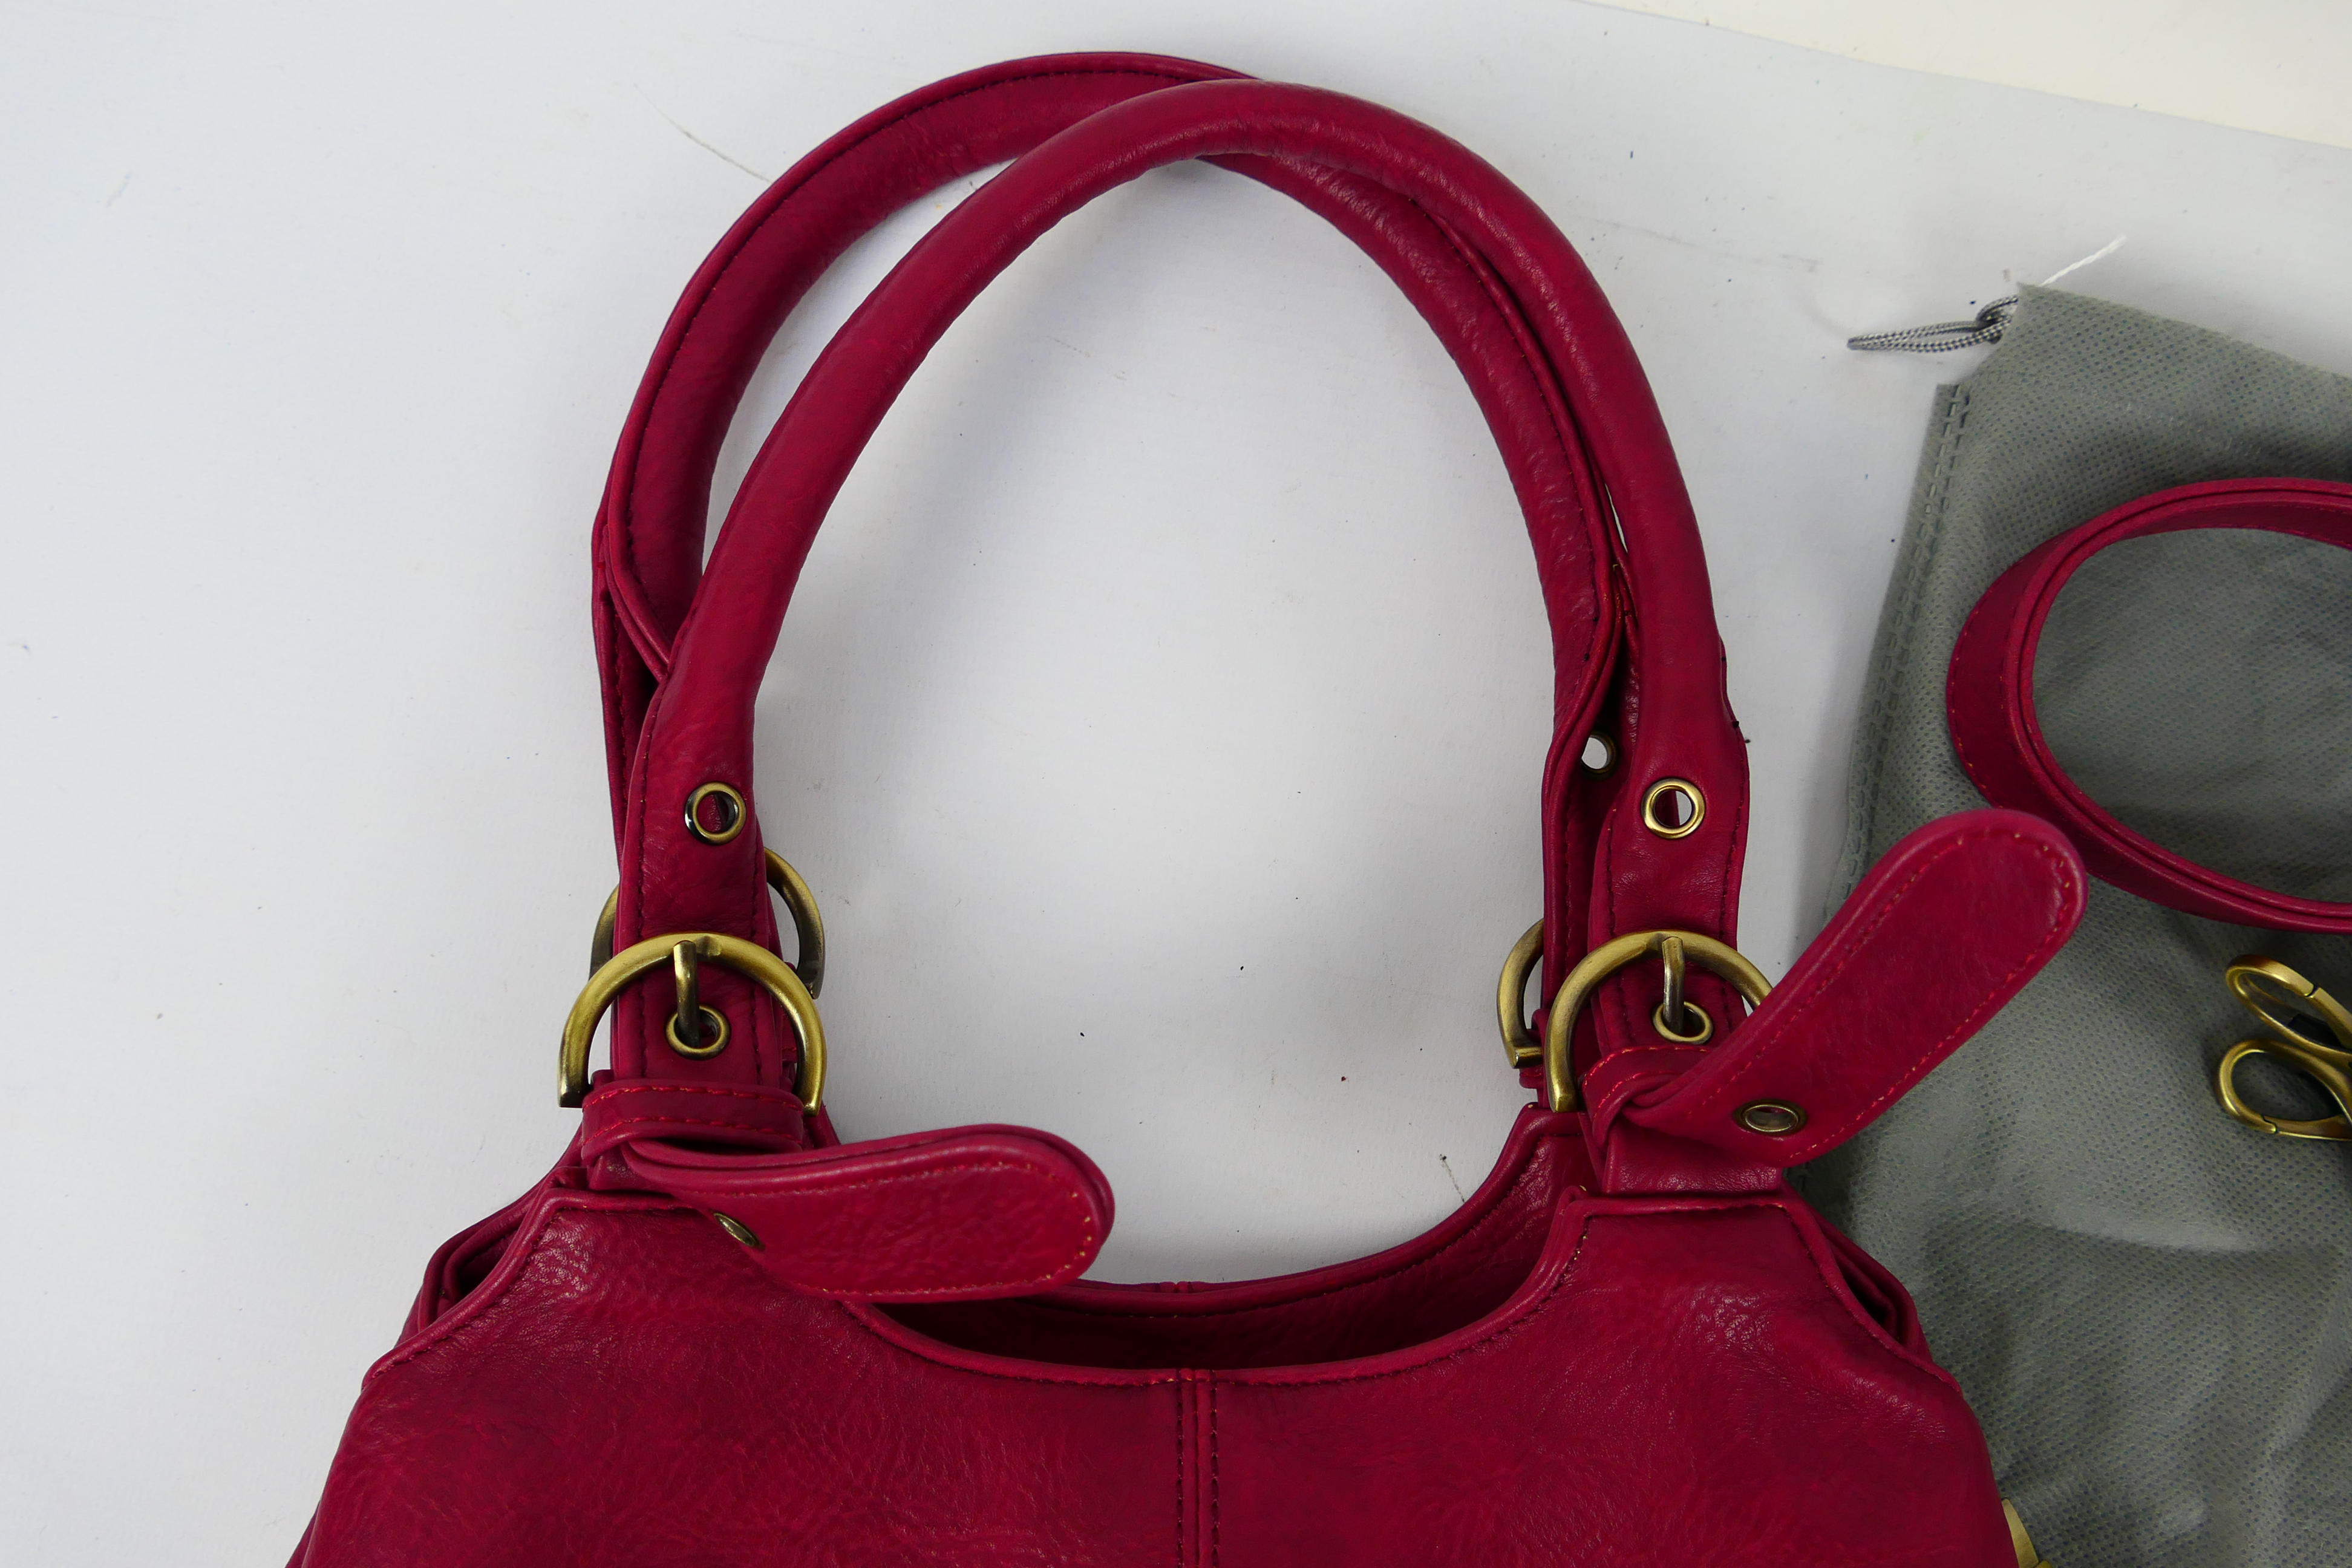 Mabel London - A Mabel London handbag in a shade of red. With two carry handles and shoulder strap. - Image 3 of 9